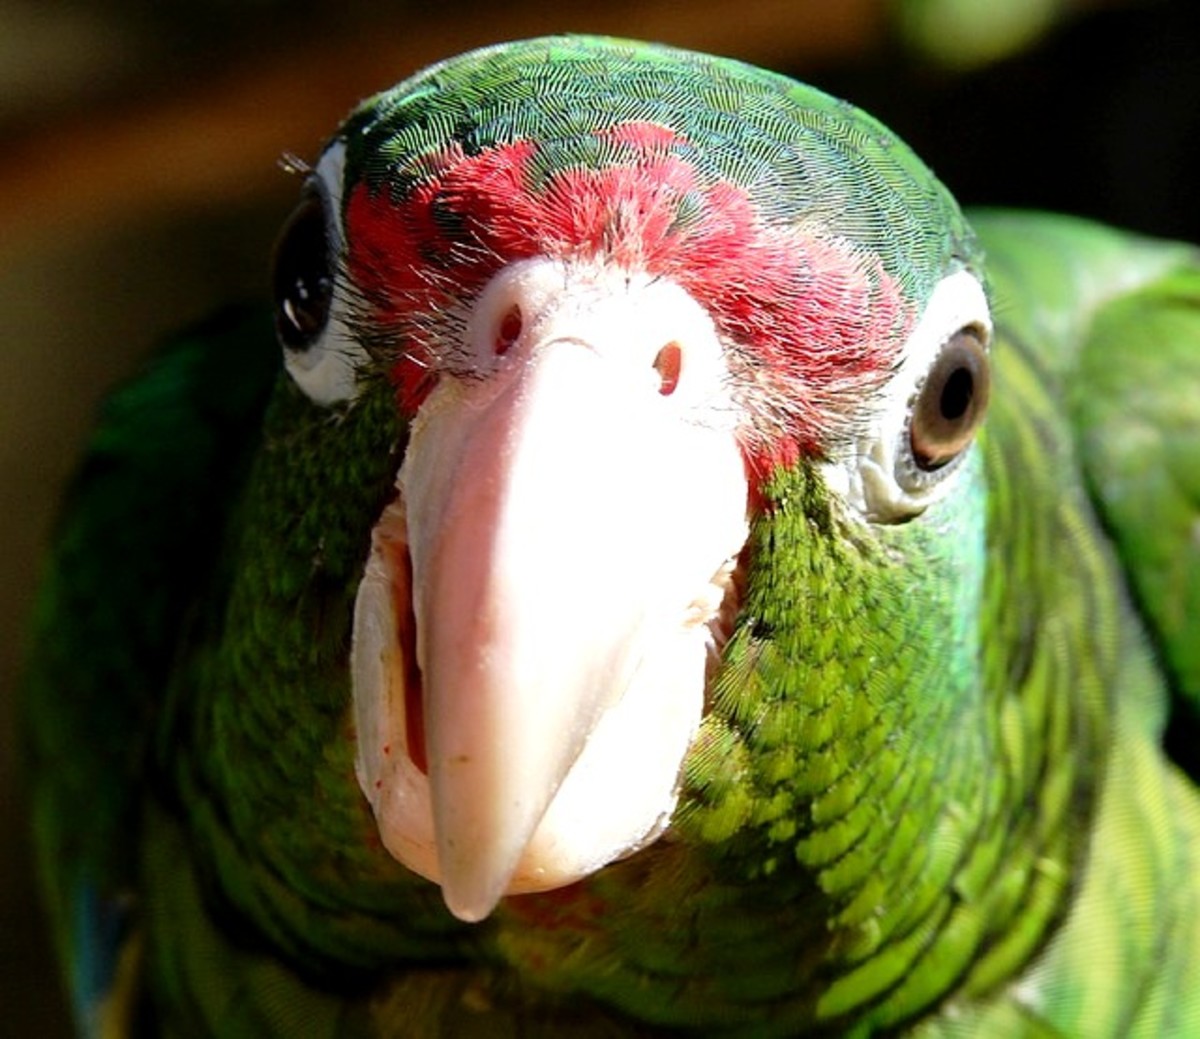 A parrot carefully observes and learns, and you can teach it to converse with you.